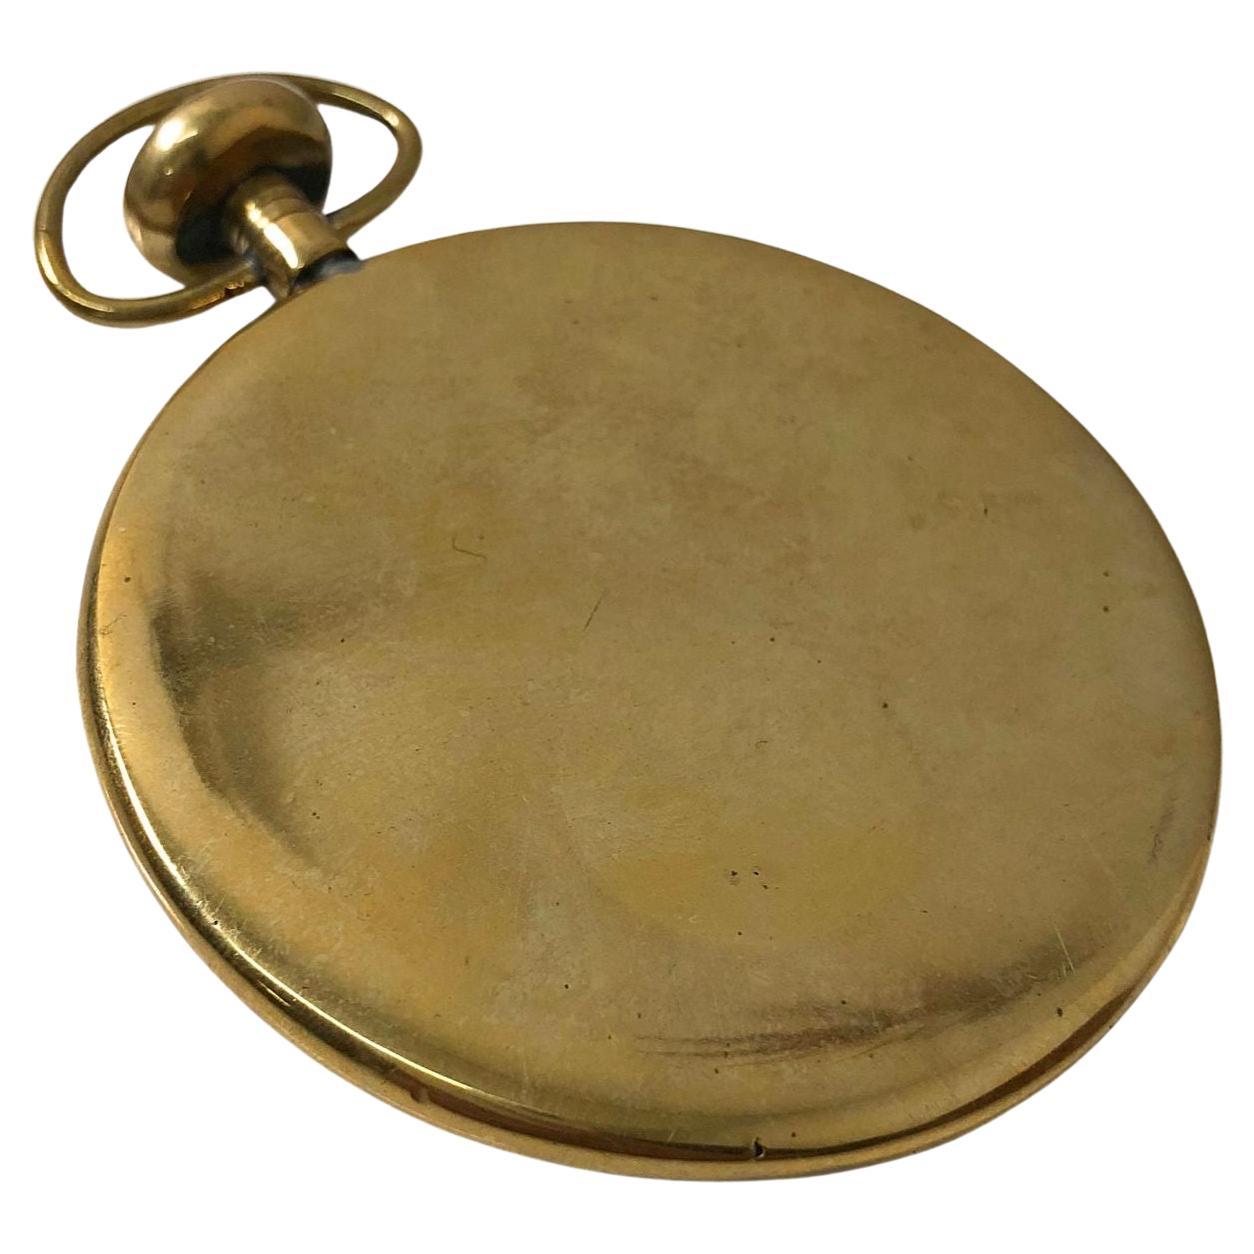 Vintage Brass Pocket Watch Paperweight, Carl Aubock attr. 1950's

Vintage paperweight attributed to Carl Aubock, 1950's. Modernist form of a pocket watch, in solid brass.

Additional Information:
Materials: Brass
